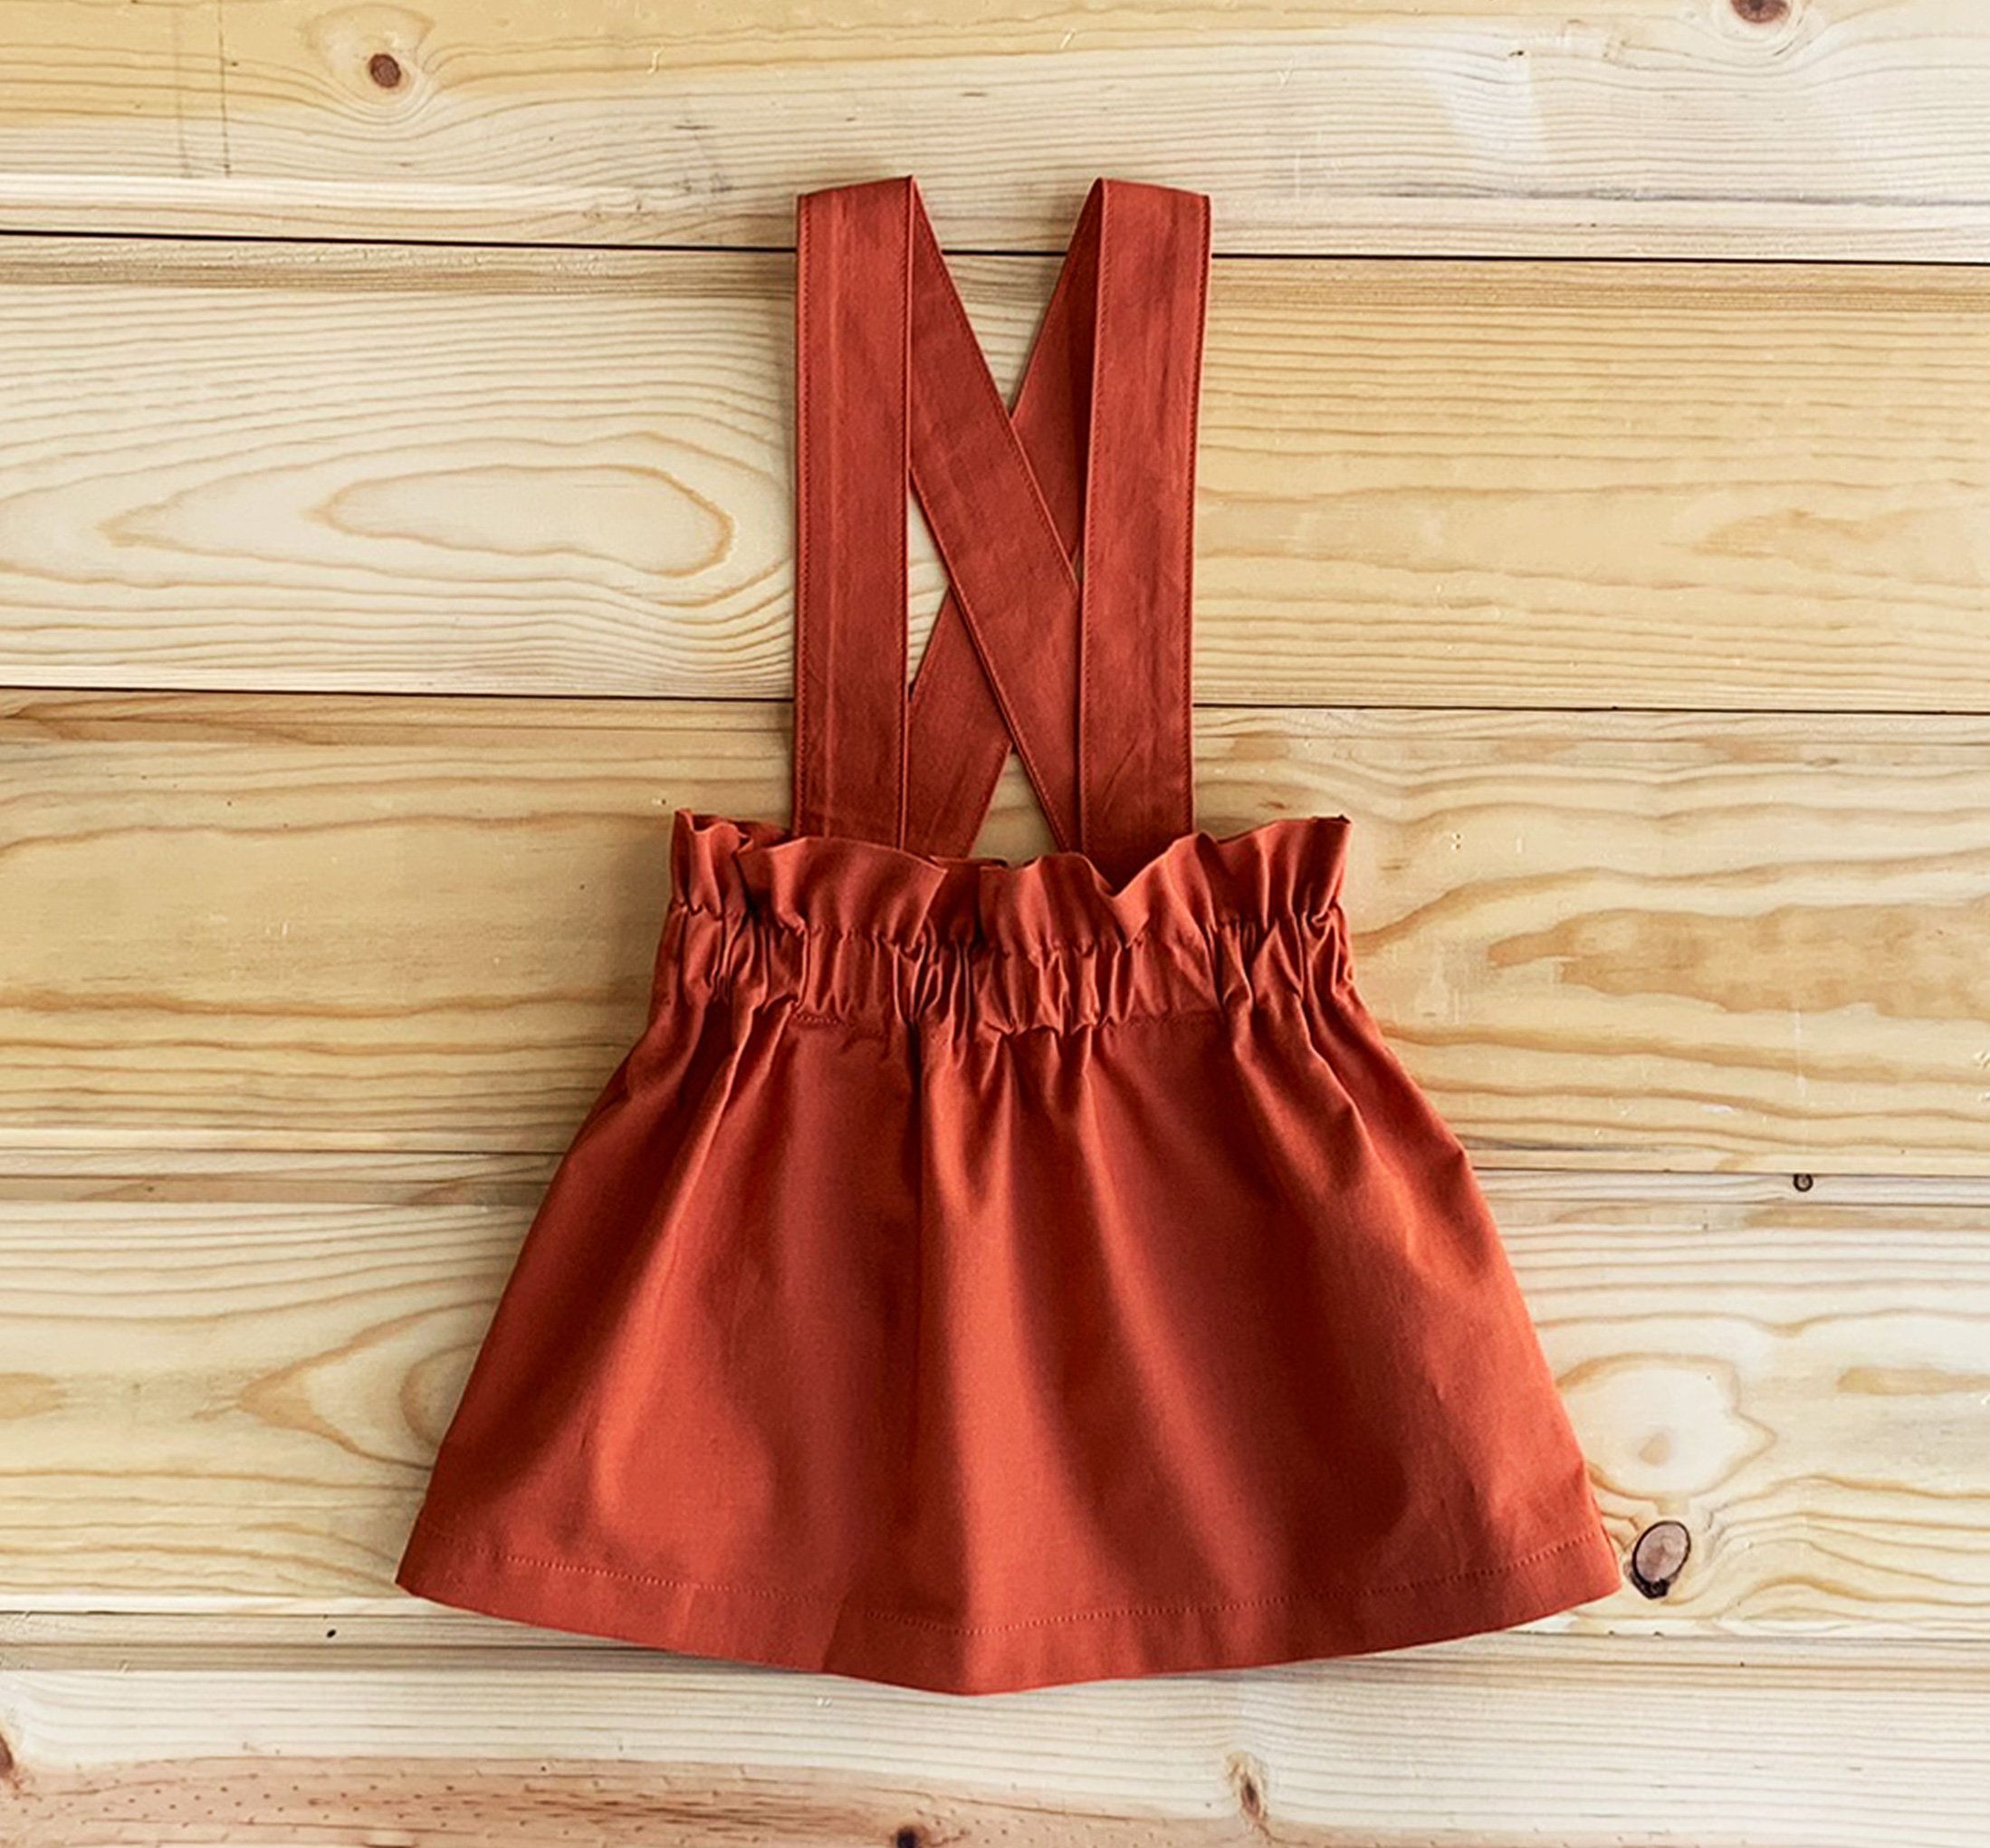 Thanksgiving Outfit, Orange Baby Outfit, Suspender Skirt, High Waisted Skirt, Thanksgiving Dress, Toddler Fall Dress, Orange Skirt -   17 DIY Clothes Fall etsy ideas